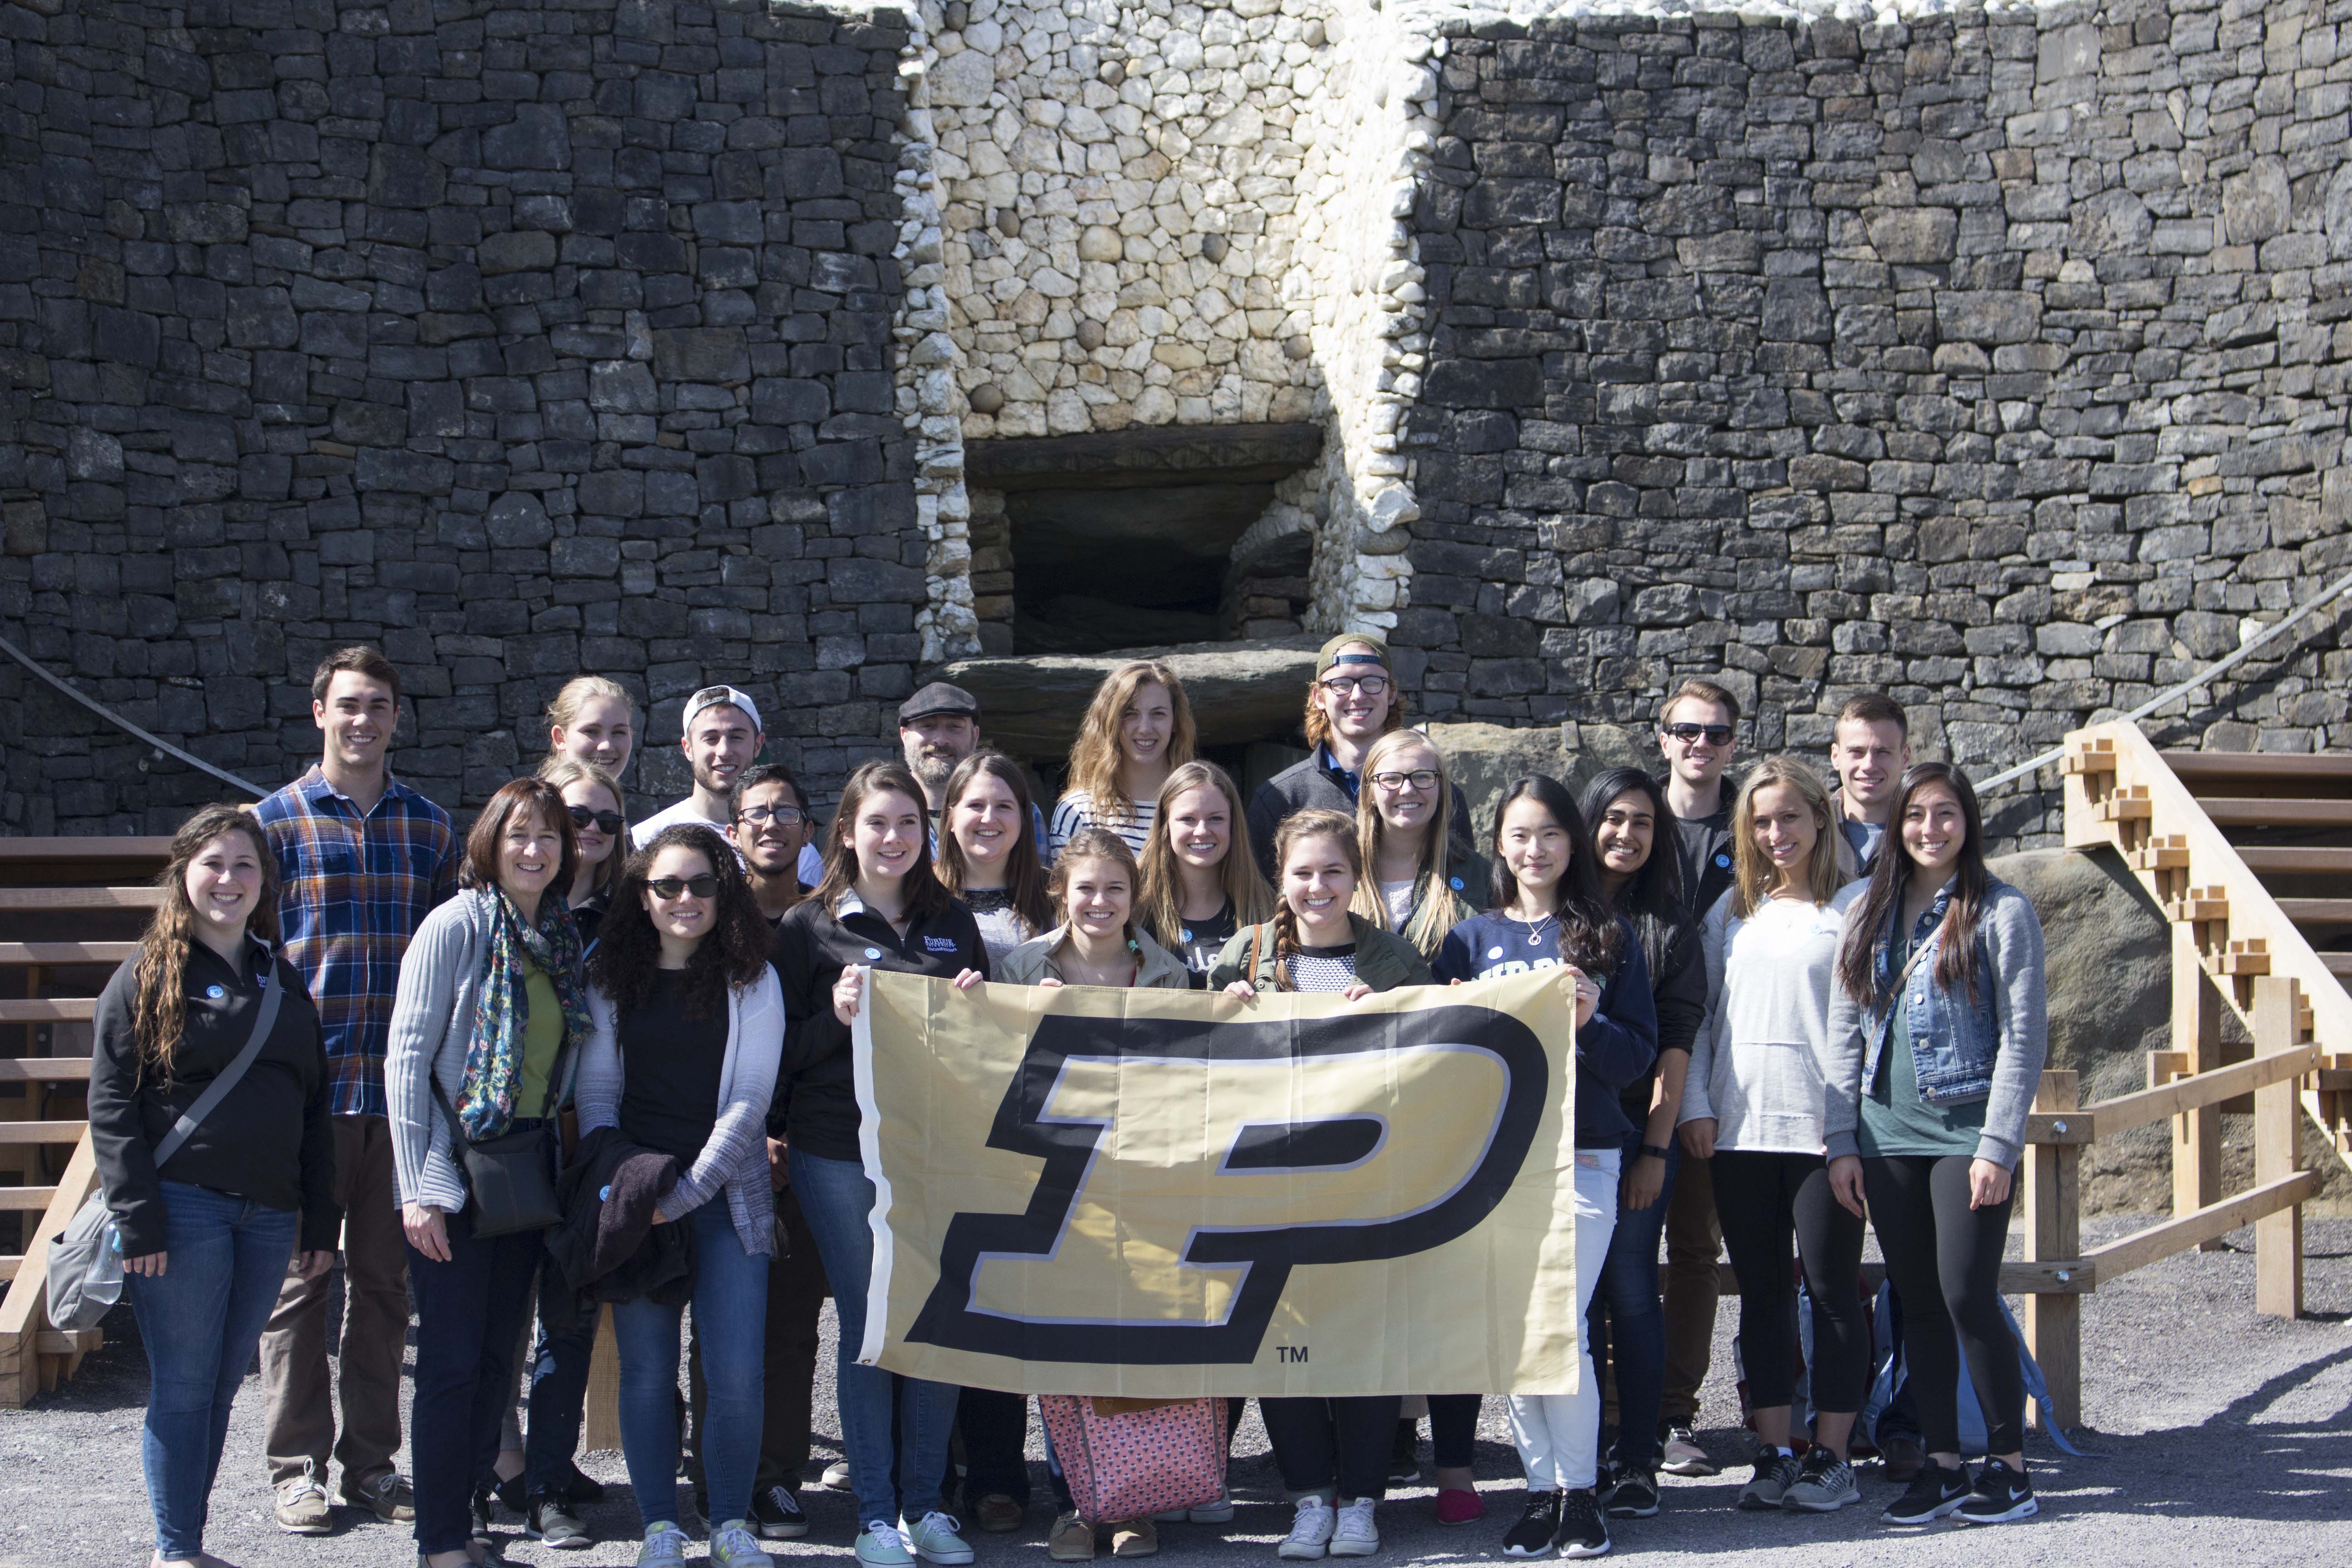 The students and advisors of the study abroad program holding a Purdue flag in front of Newgrange